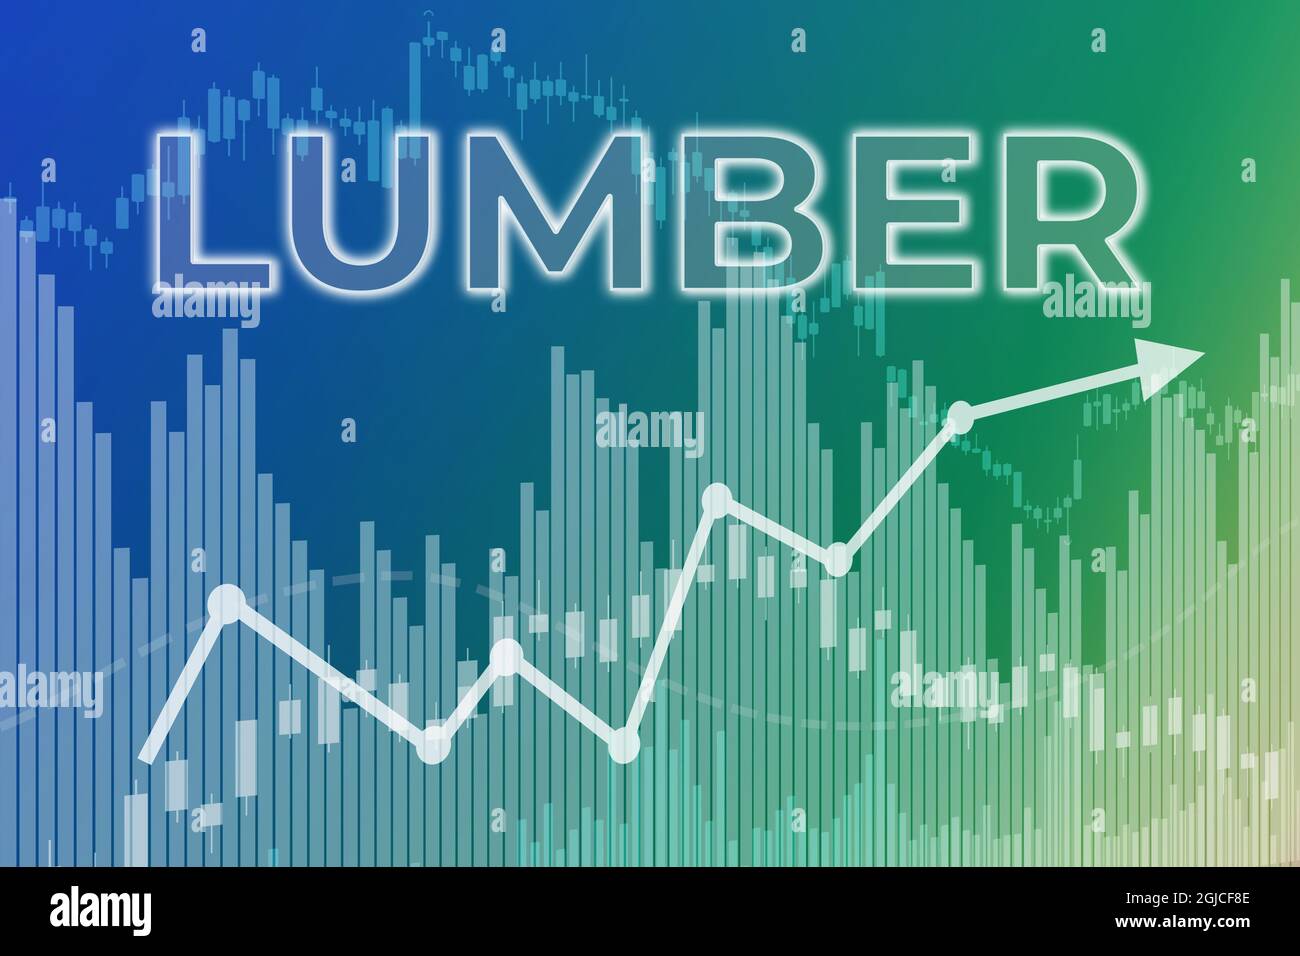 Price change on trading Lumber futures on blue and green finance background from graphs, charts, columns, candles, bars, numbers. Trend Up and Down, F Stock Photo